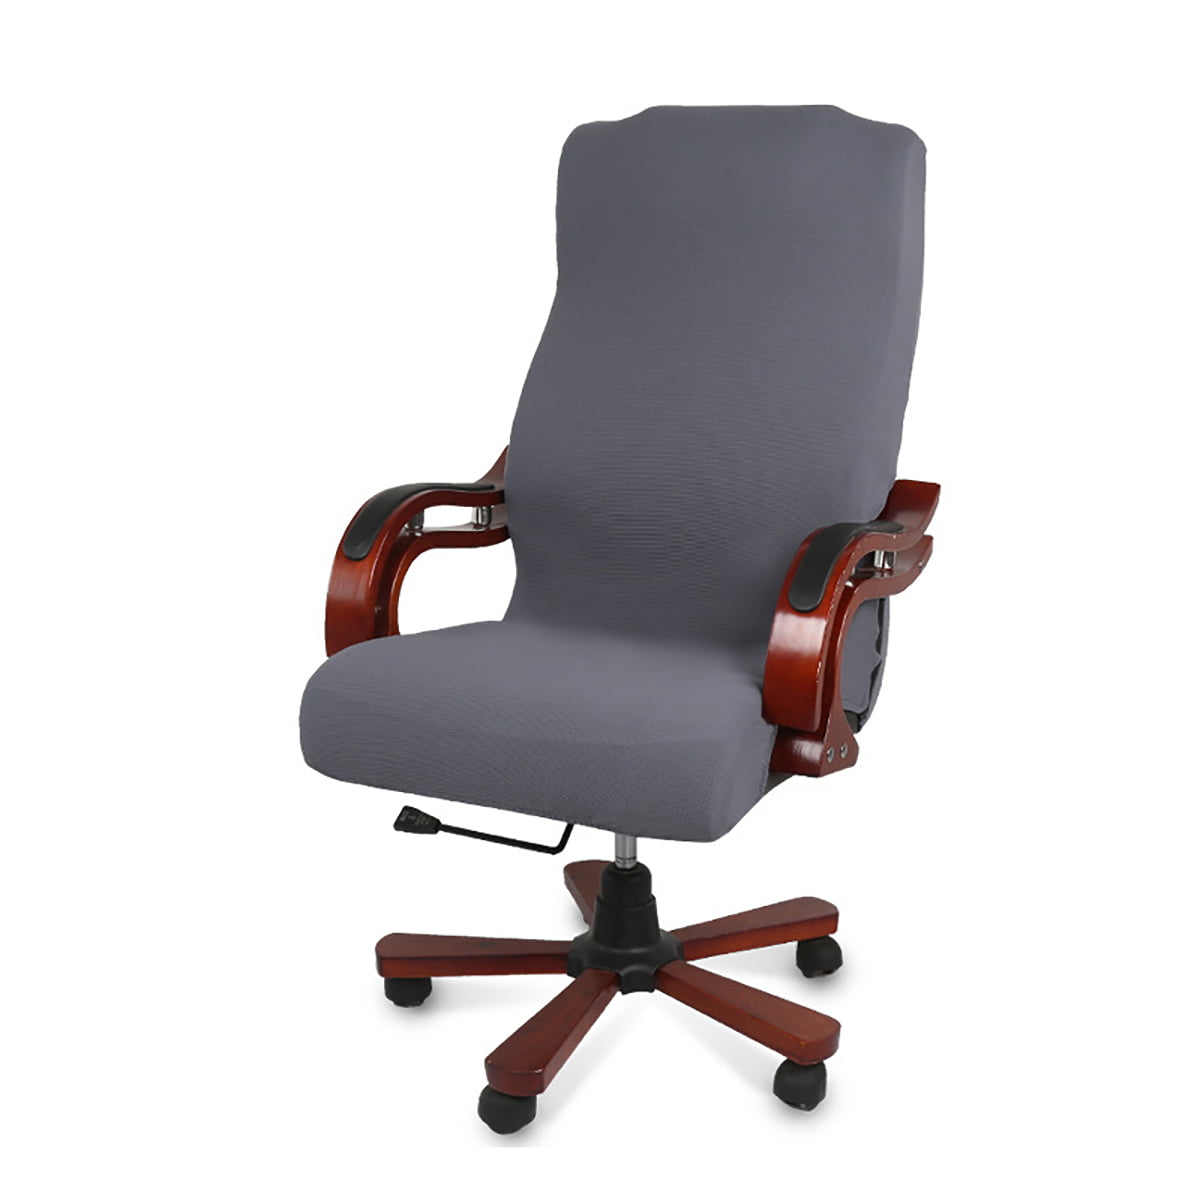 Swivel Armchair Slipcover Removable Stretch Compute Office Chair Cover Protector